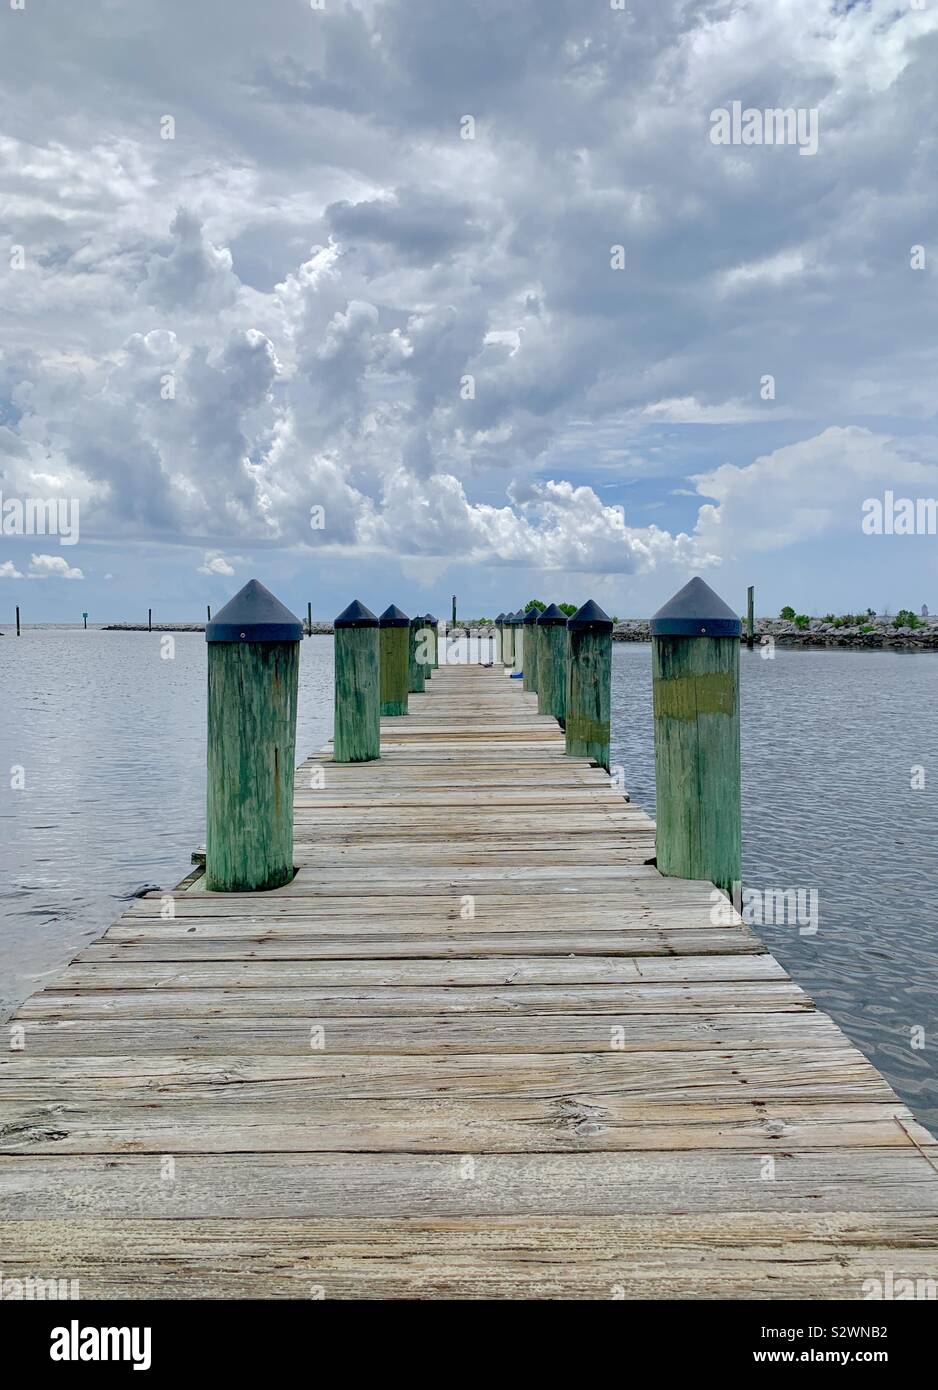 Wooden pier with view of Gulf of Mexico water Stock Photo